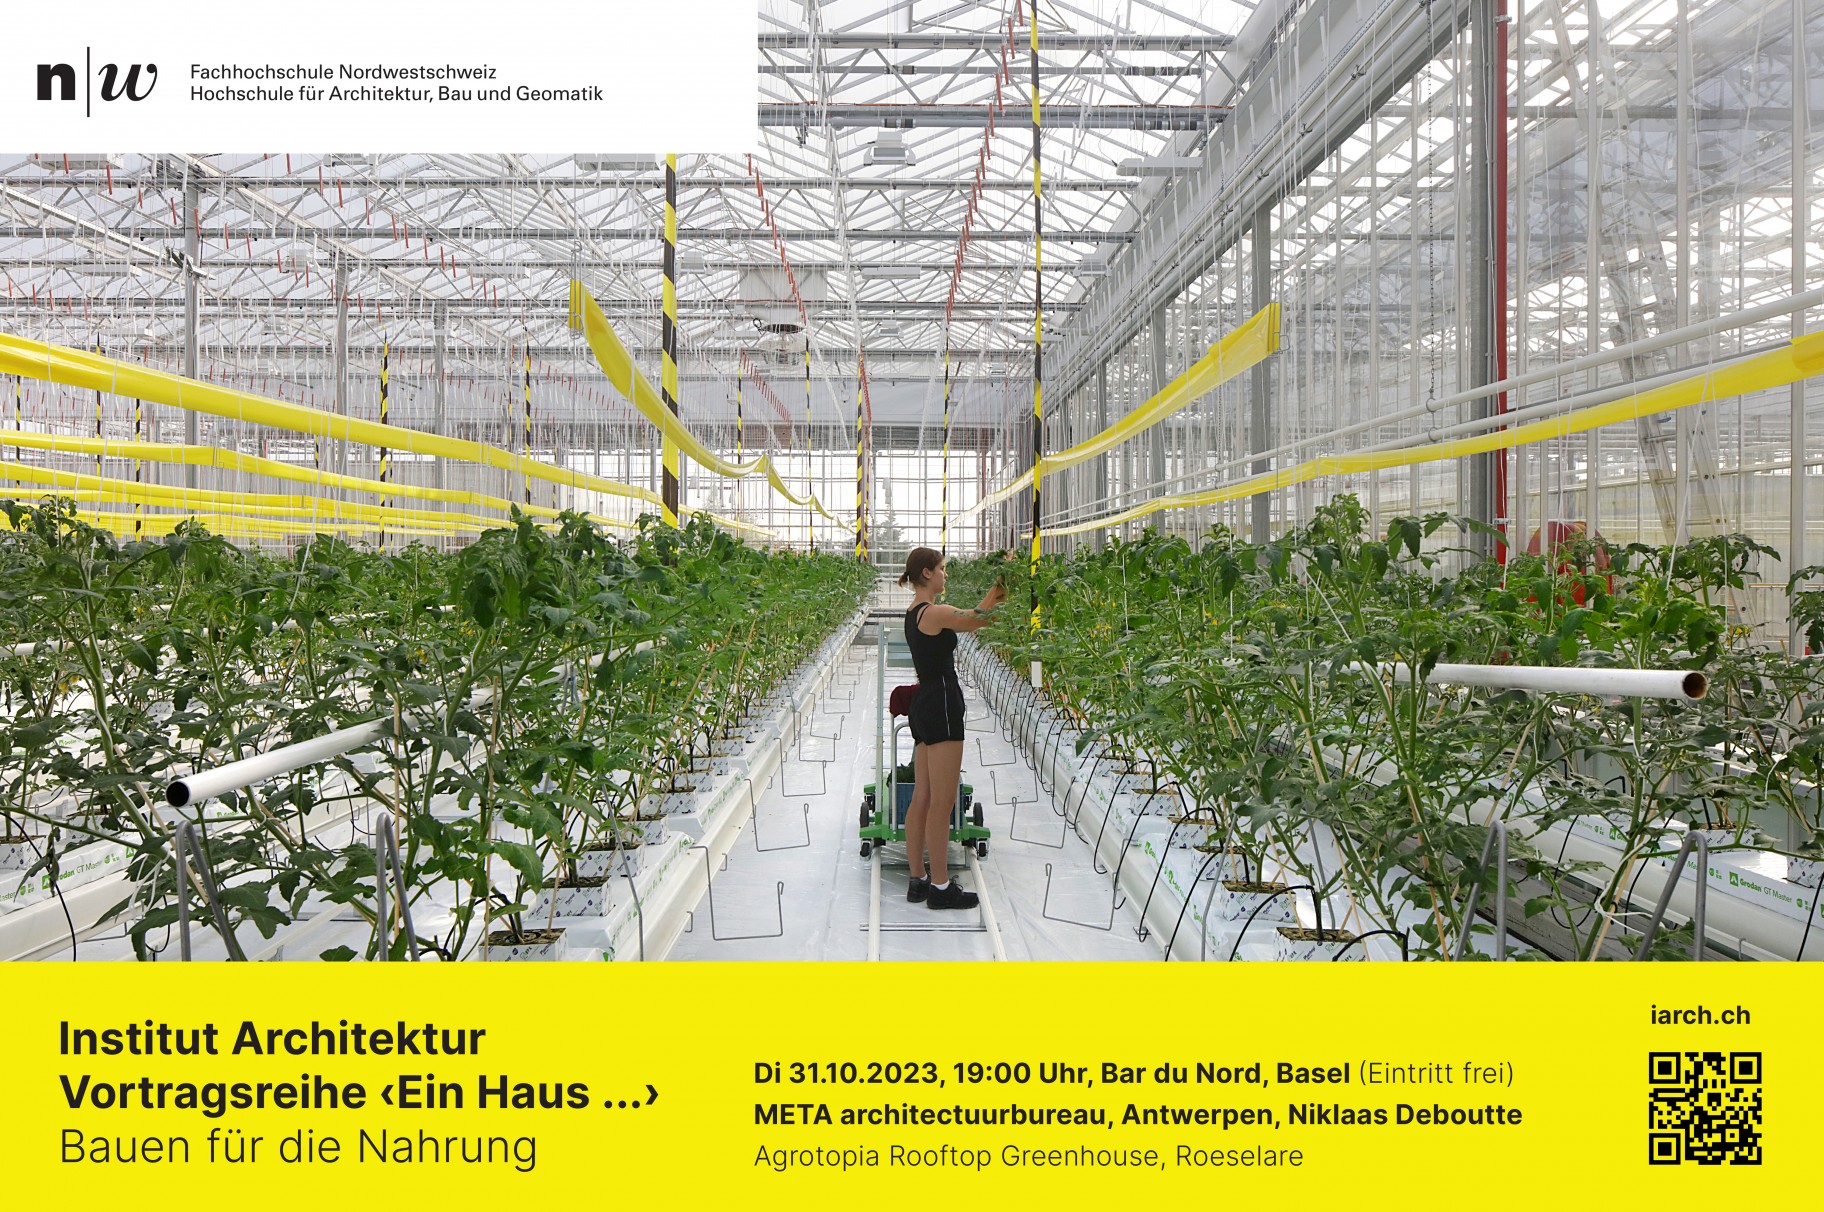 Lecture 'Ein Haus...' at FHNW Basel by Niklaas Deboutte